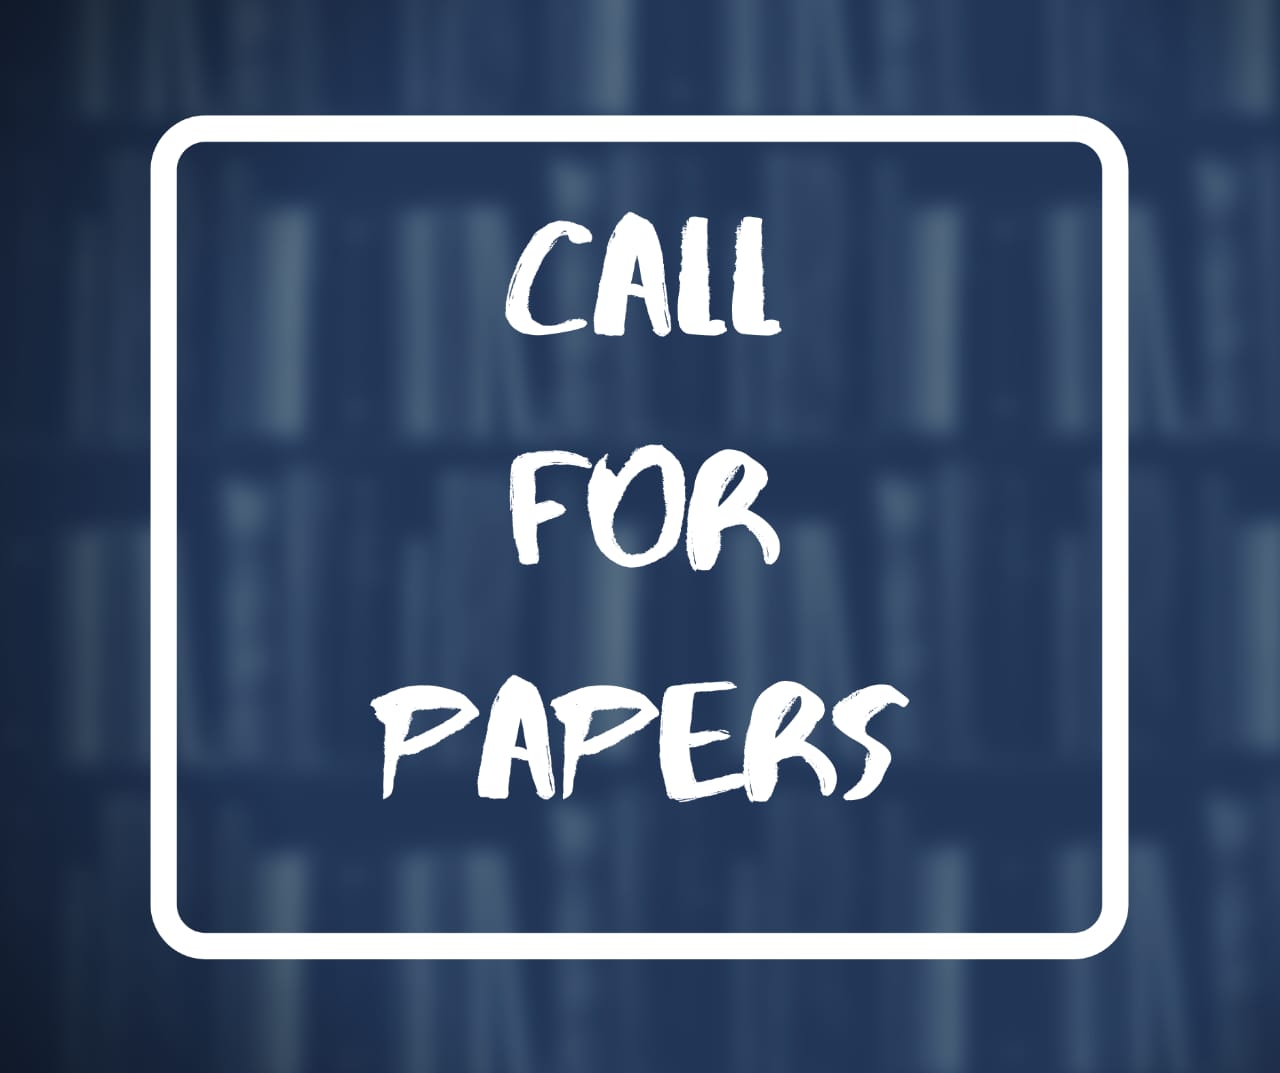 CALL FOR PAPERS! thematic Public Law issue of the Católica Law Review on “Climate Litigation Before Domestic and International Court”!September 30!